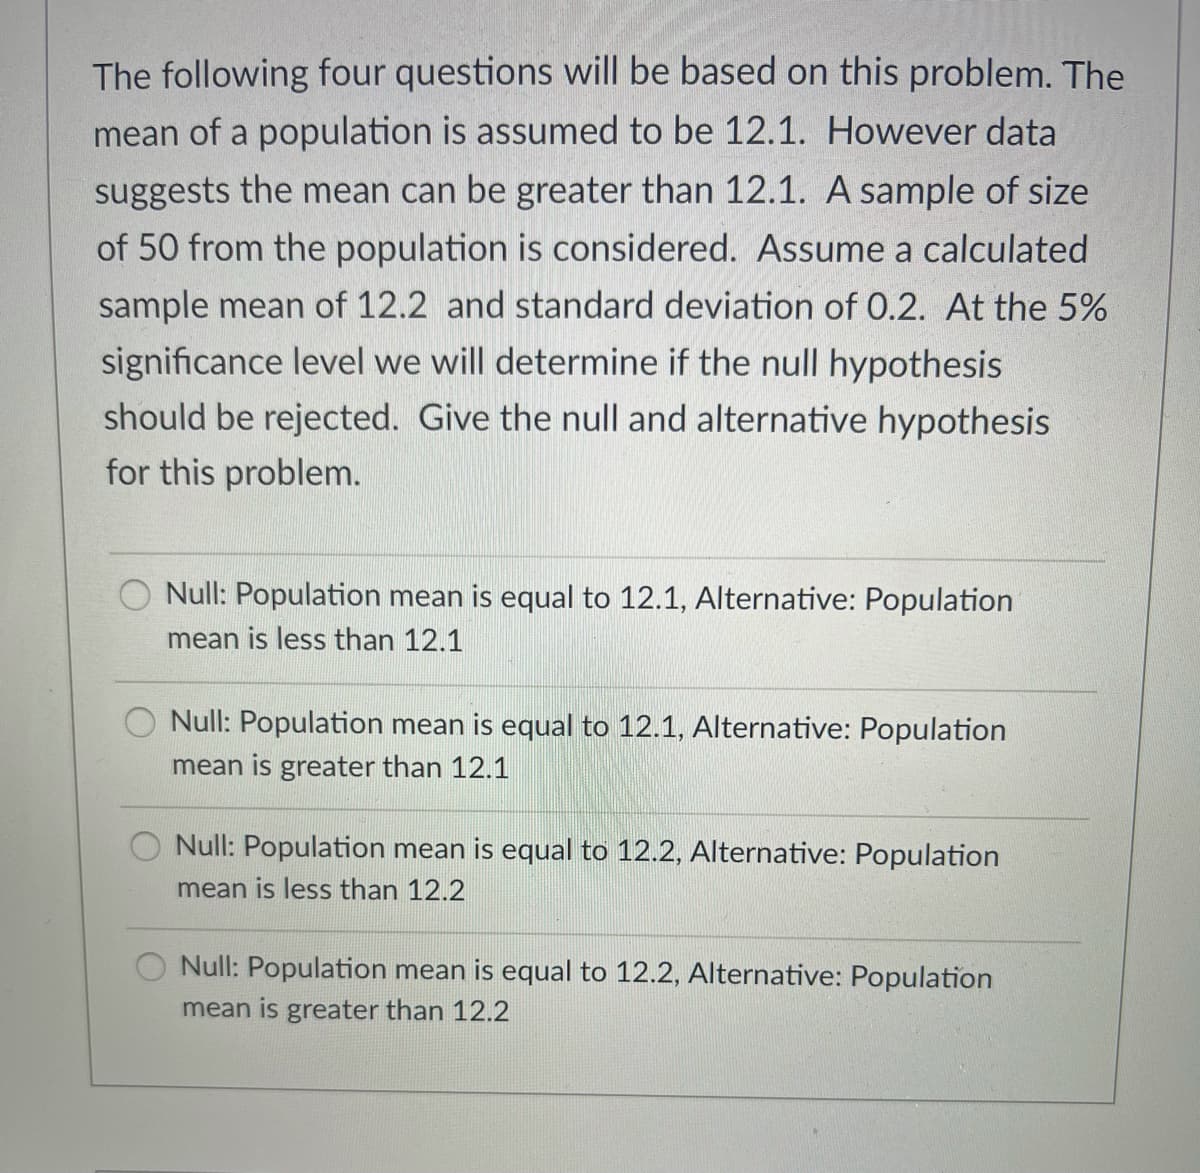 The following four questions will be based on this problem. The
mean of a population is assumed to be 12.1. However data
suggests the mean can be greater than 12.1. A sample of size
of 50 from the population is considered. Assume a calculated
sample mean of 12.2 and standard deviation of 0.2. At the 5%
significance level we will determine if the null hypothesis
should be rejected. Give the null and alternative hypothesis
for this problem.
Null: Population mean is equal to 12.1, Alternative: Population
mean is less than 12.1
O Null: Population mean is equal to 12.1, Alternative: Population
mean is greater than 12.1
Null: Population mean is equal to 12.2, Alternative: Population
mean is less than 12.2
Null: Population mean is equal to 12.2, Alternative: Population
mean is greater than 12.2
